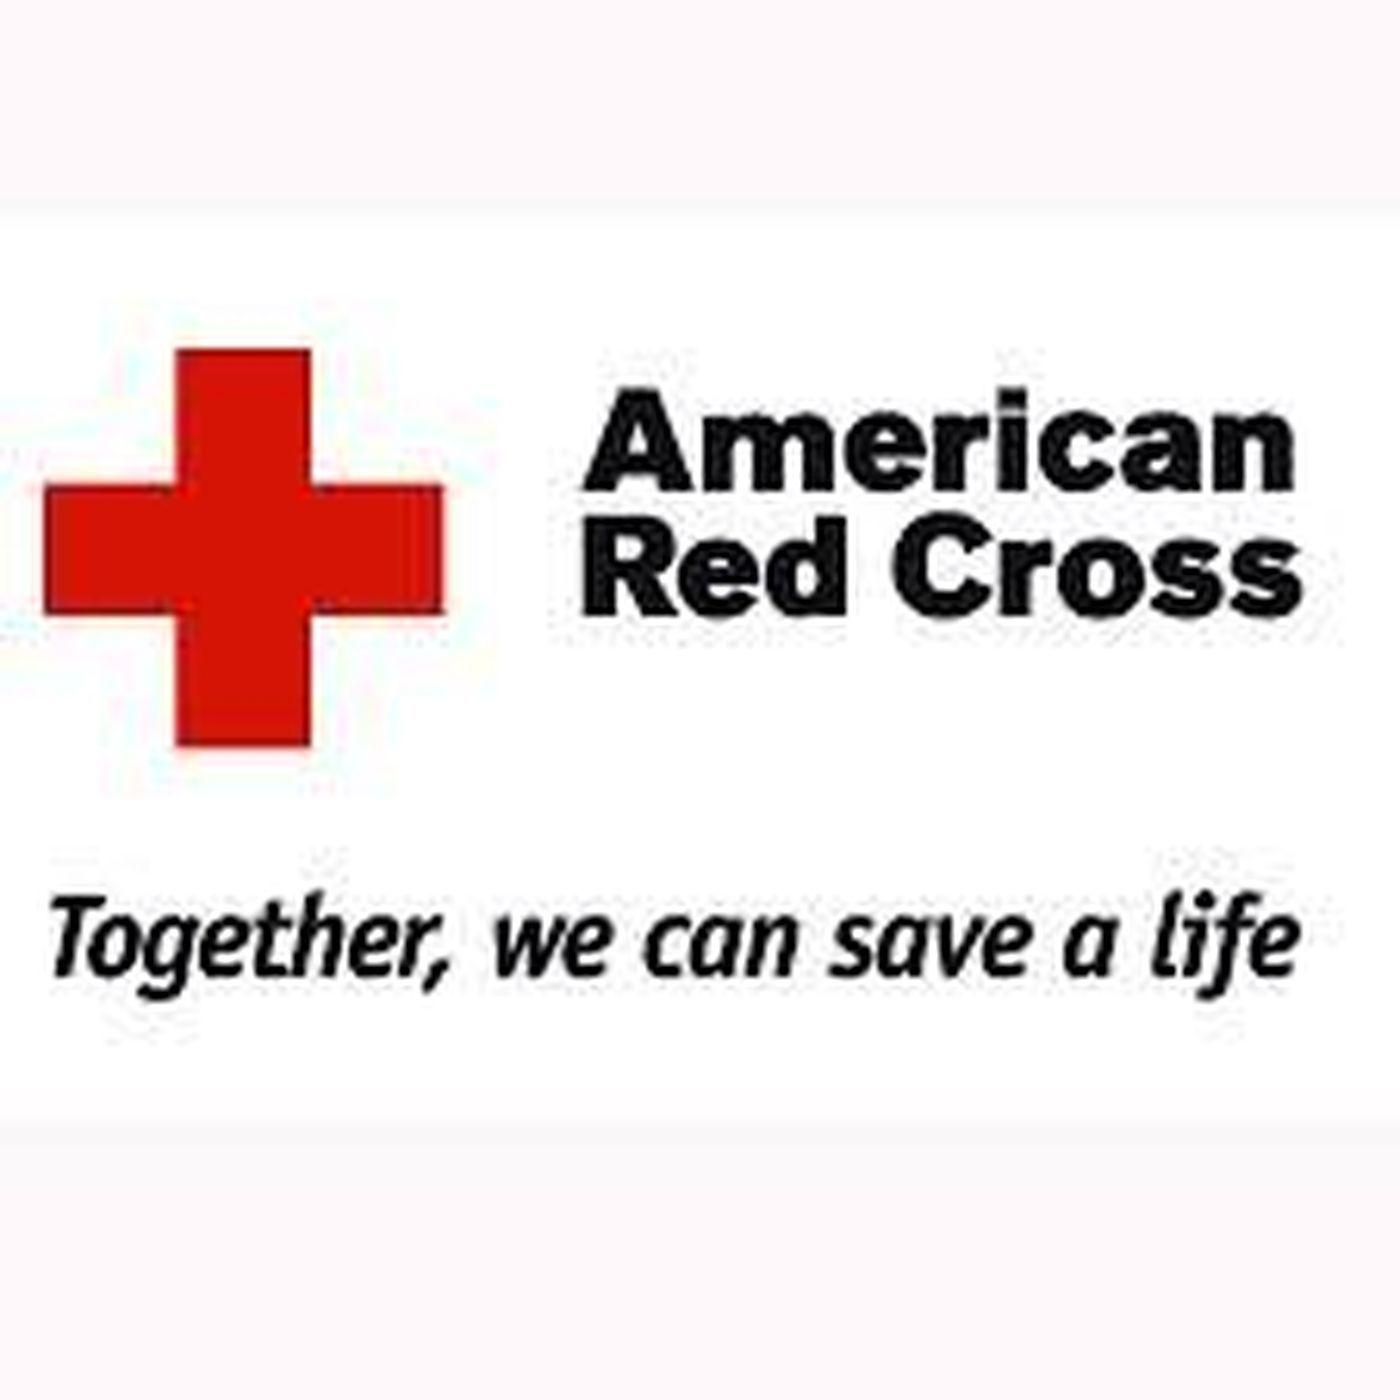 Big Picture of American Red Cross Logo - Red Cross in Southern Arizona moves toward big change